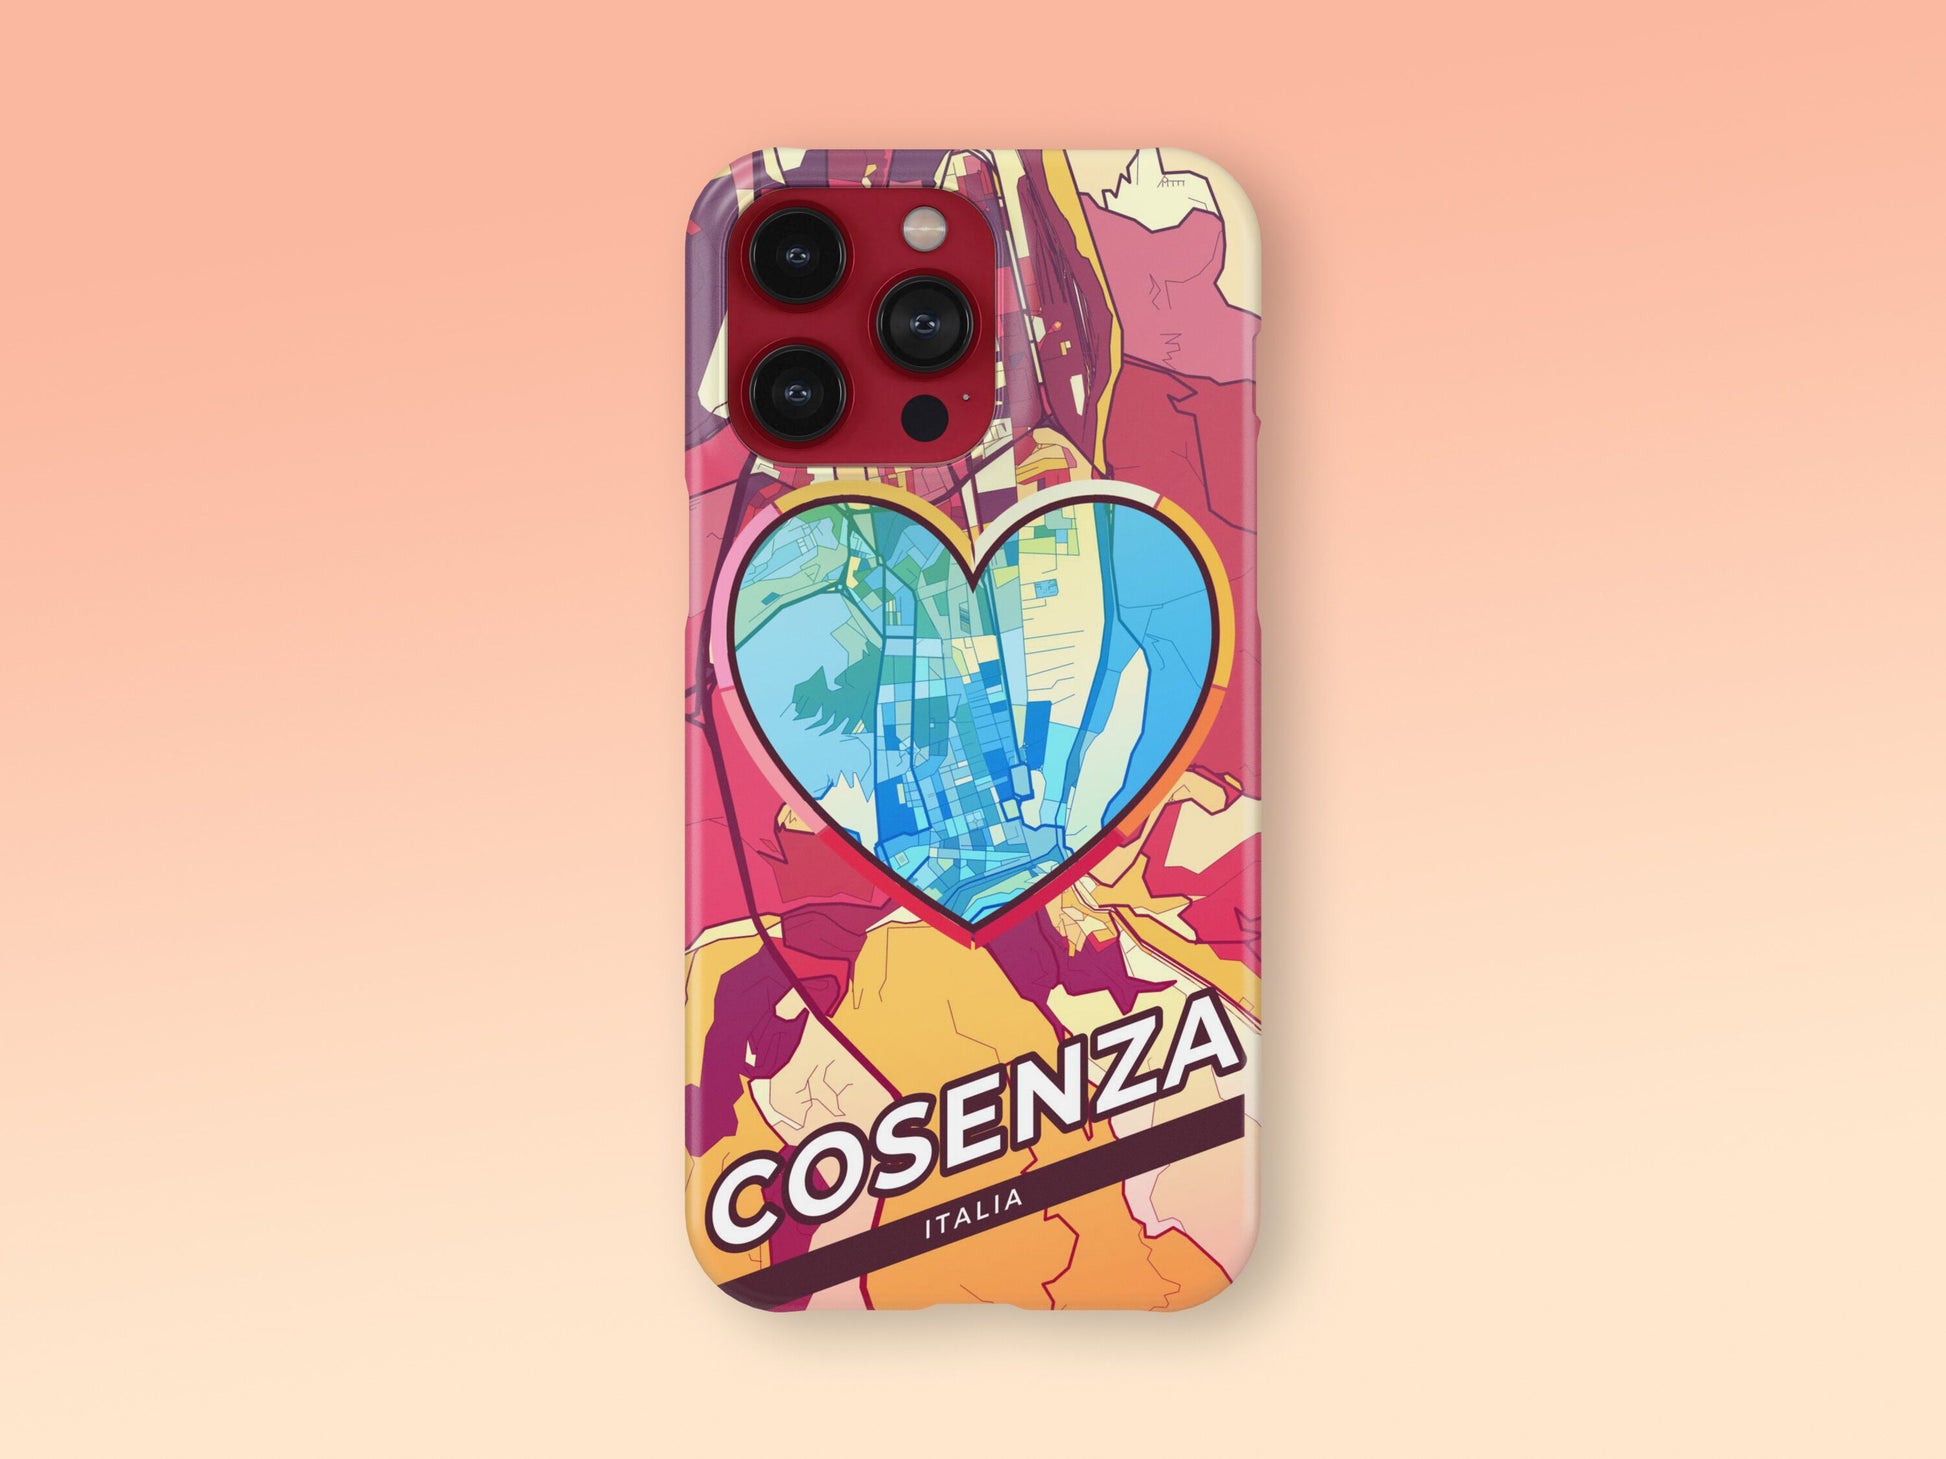 Cosenza Italy slim phone case with colorful icon. Birthday, wedding or housewarming gift. Couple match cases. 2